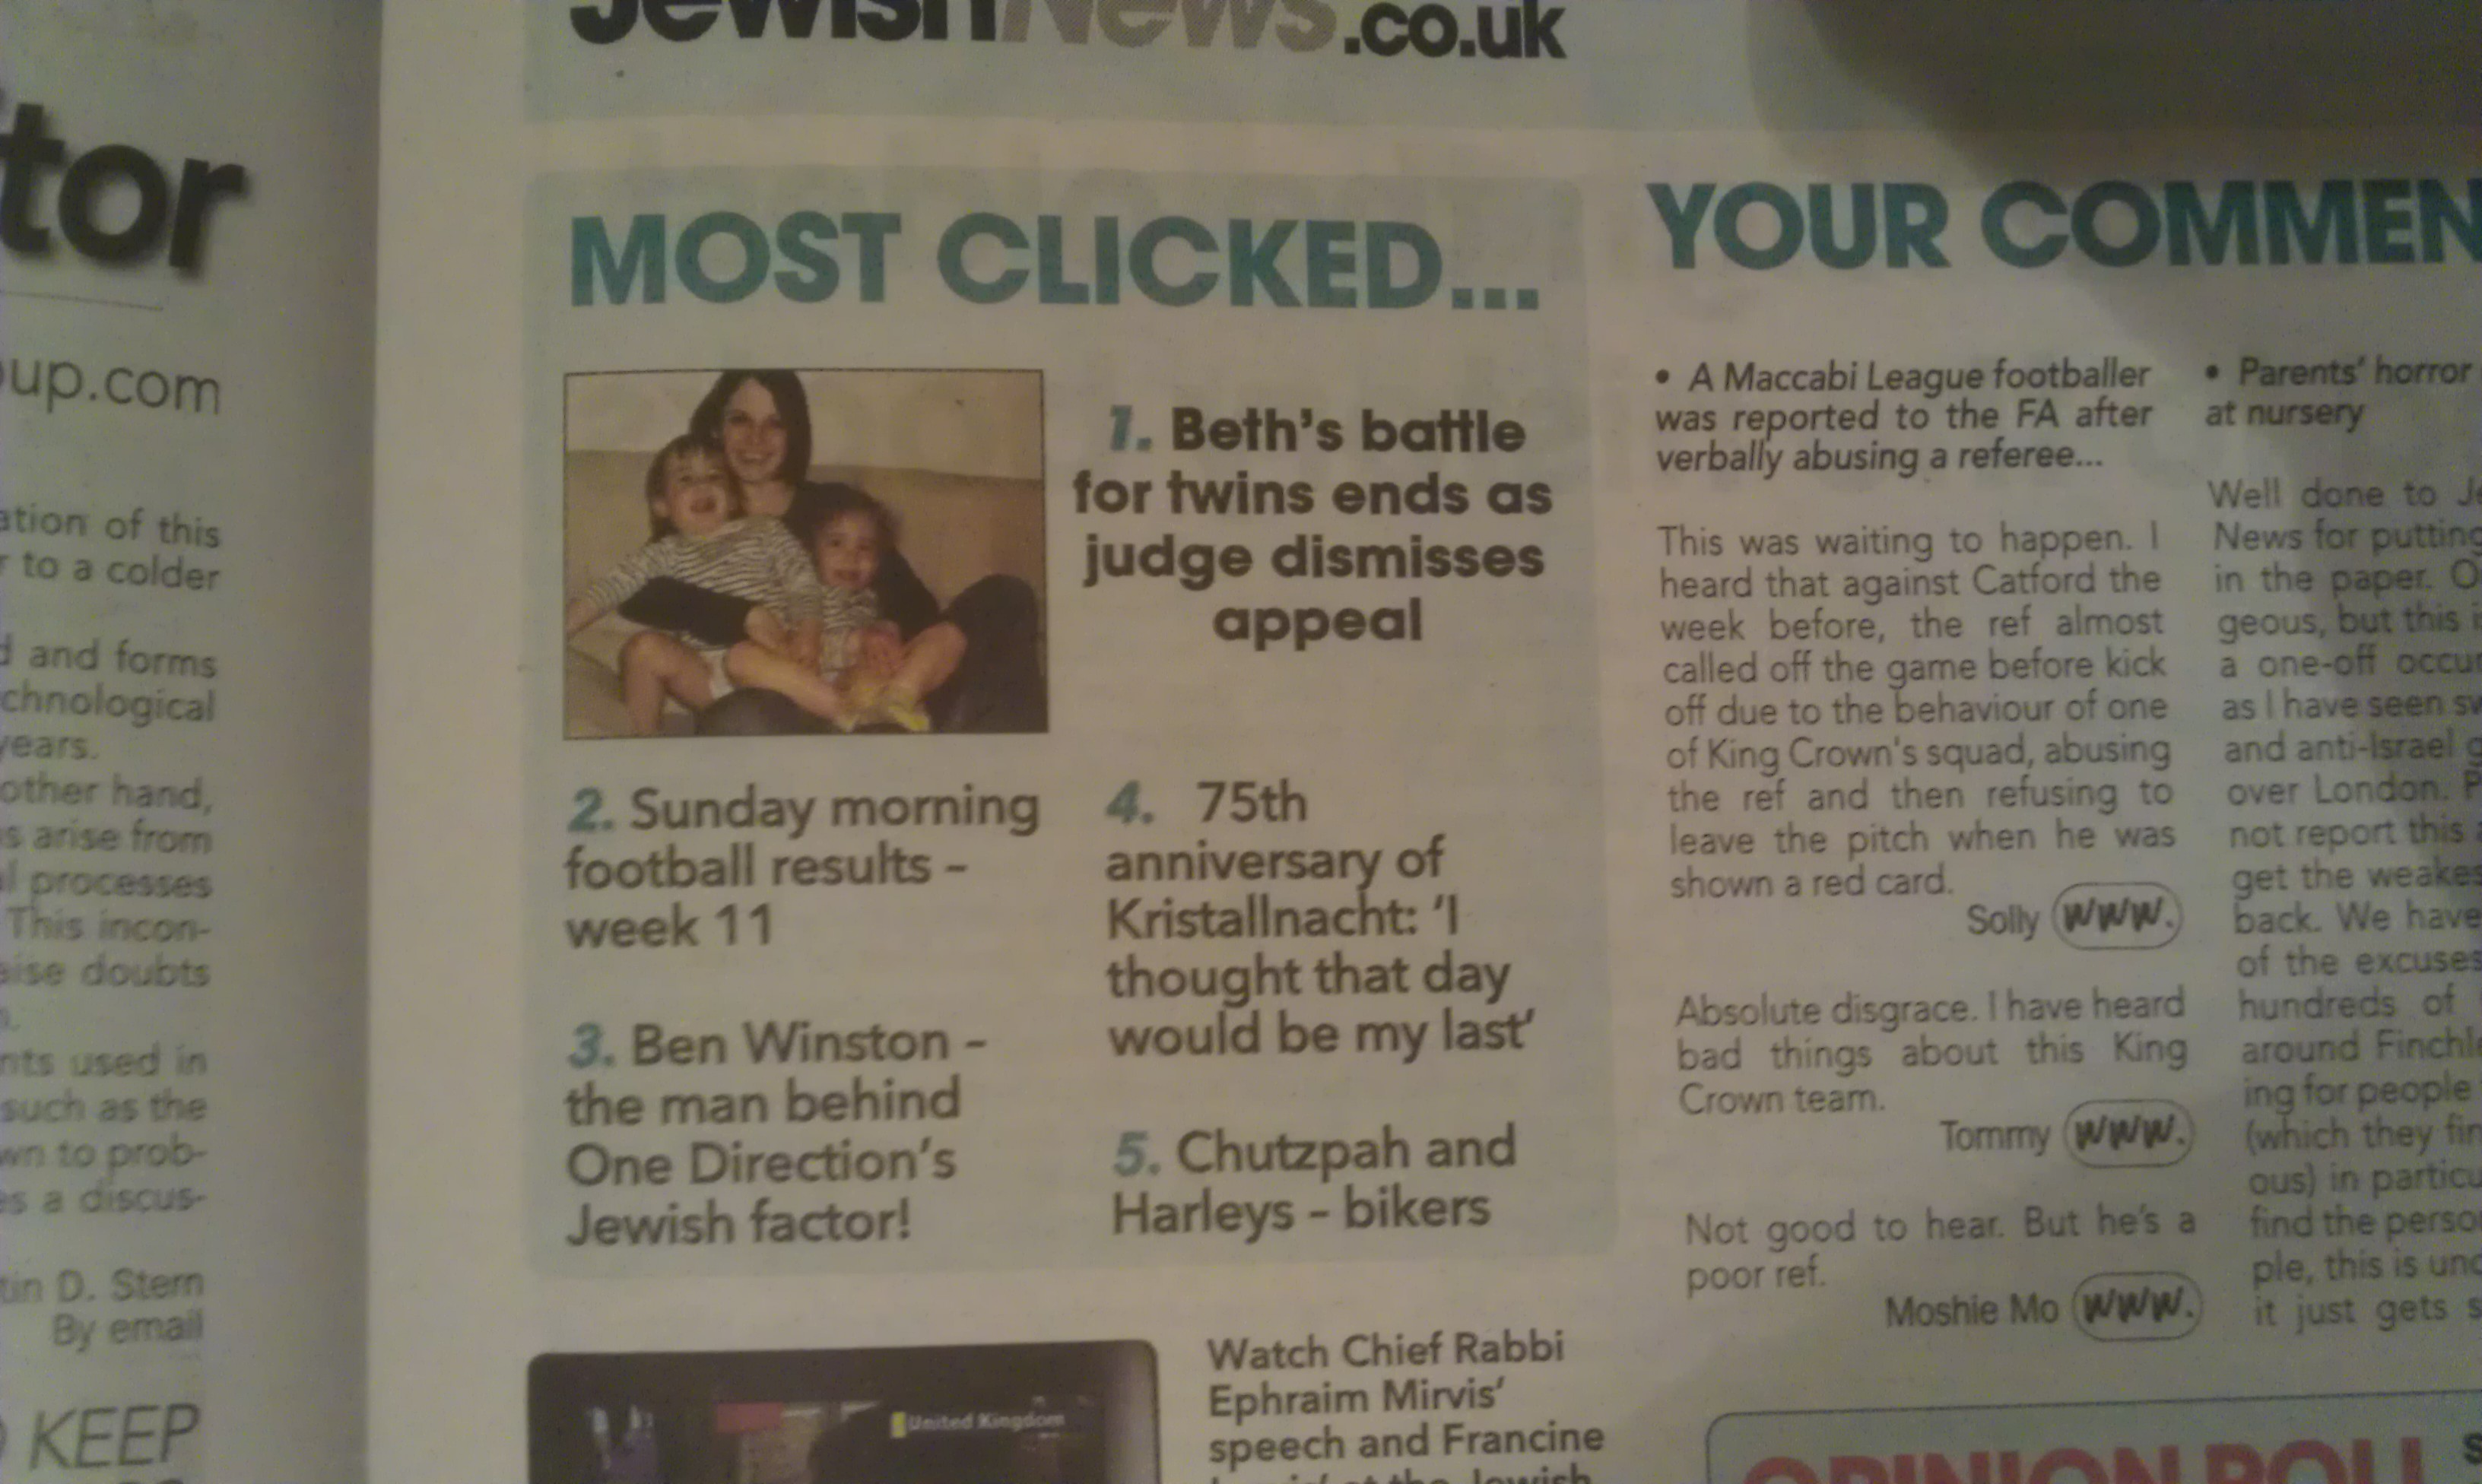 Most Clicked Item on the Jewish News website